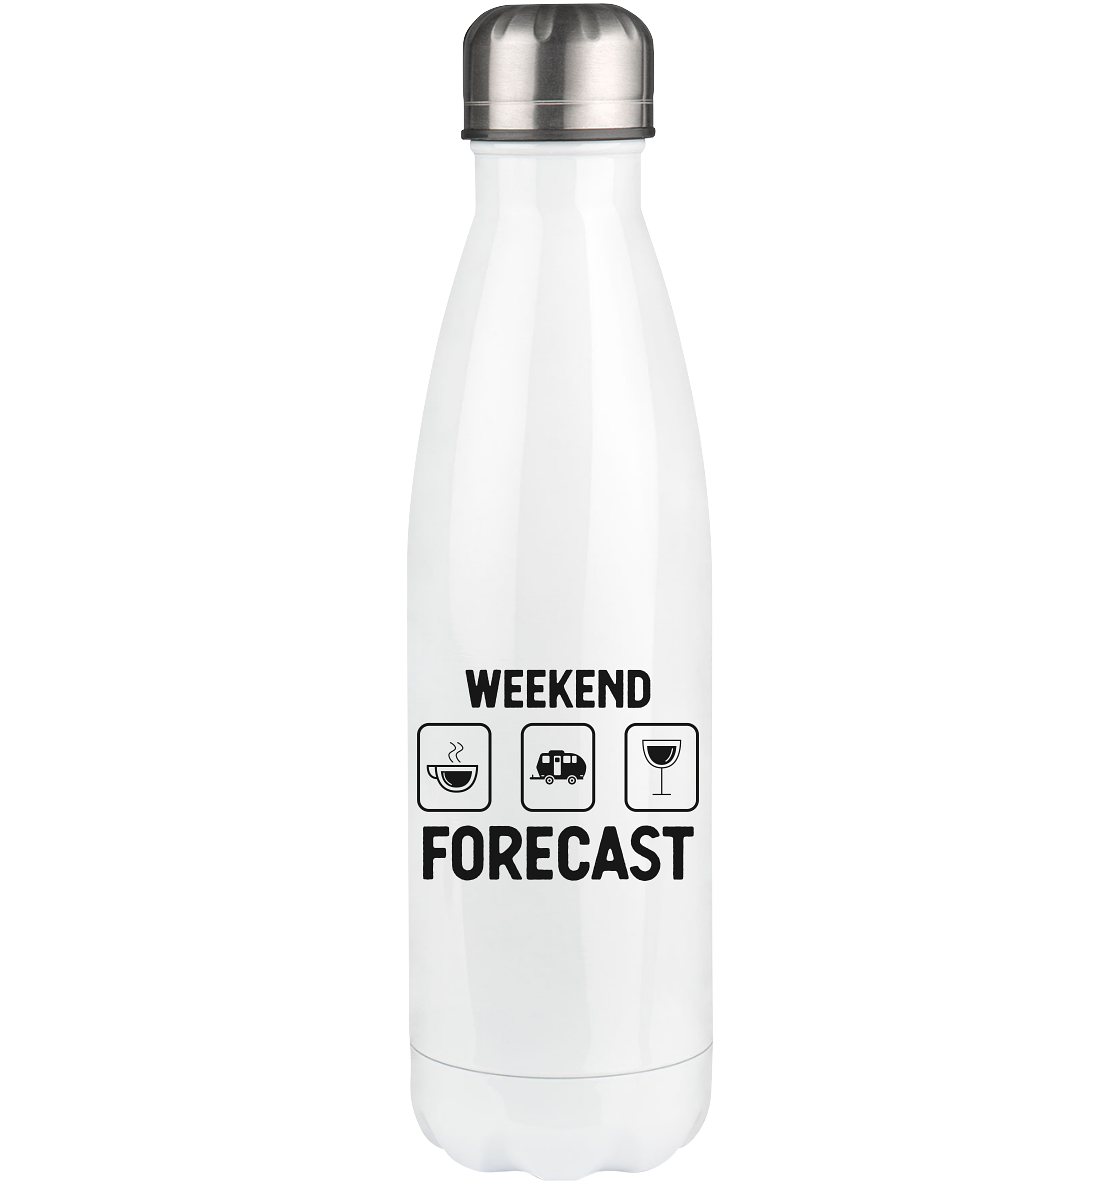 Weekend Forecast 2 - Edelstahl Thermosflasche camping UONP 500ml